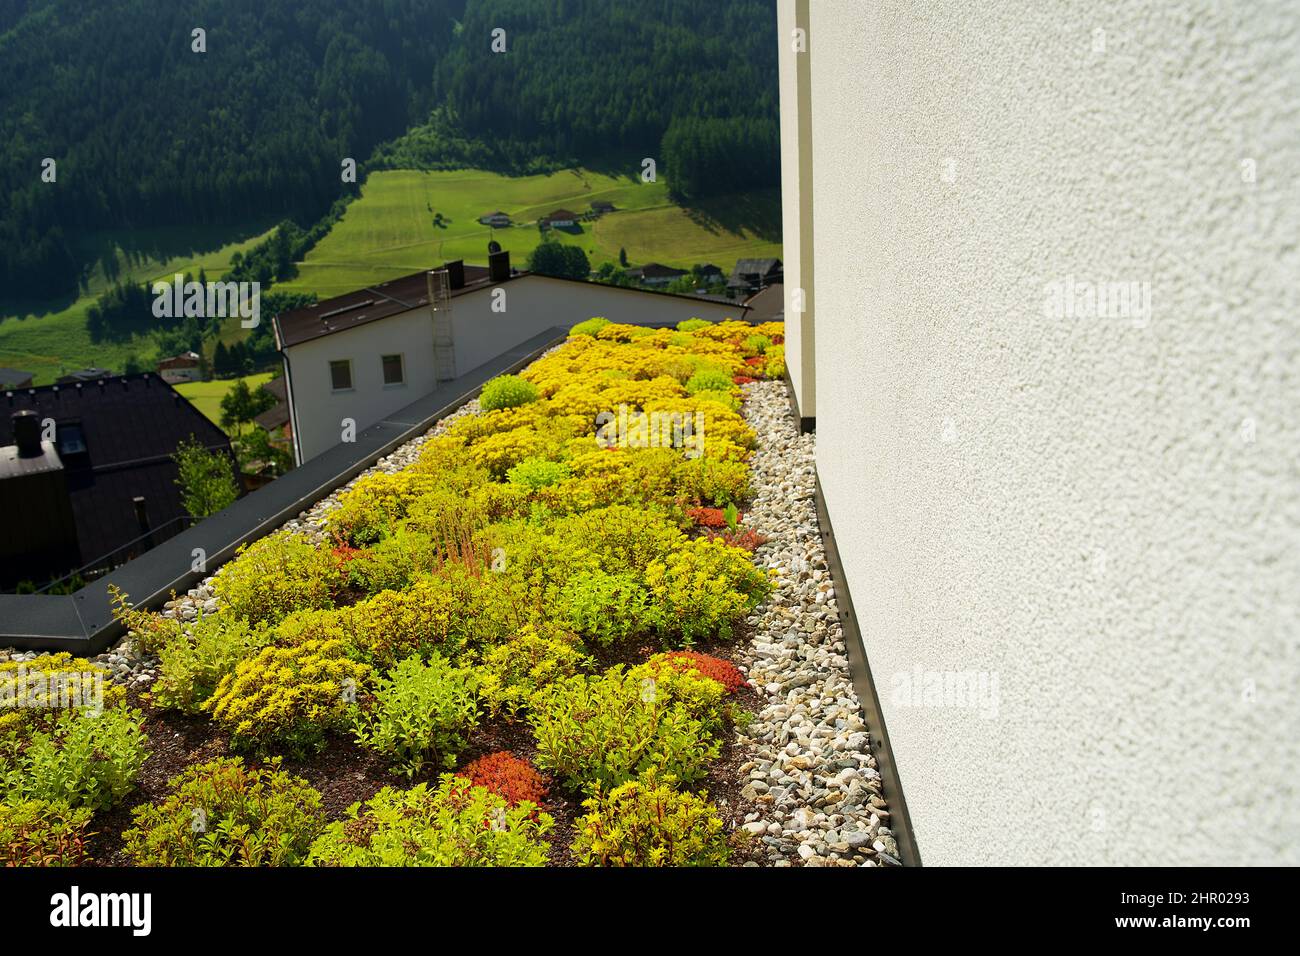 Blooming sedum rooftop garden on a  green roof in the summer in an urban environment Stock Photo